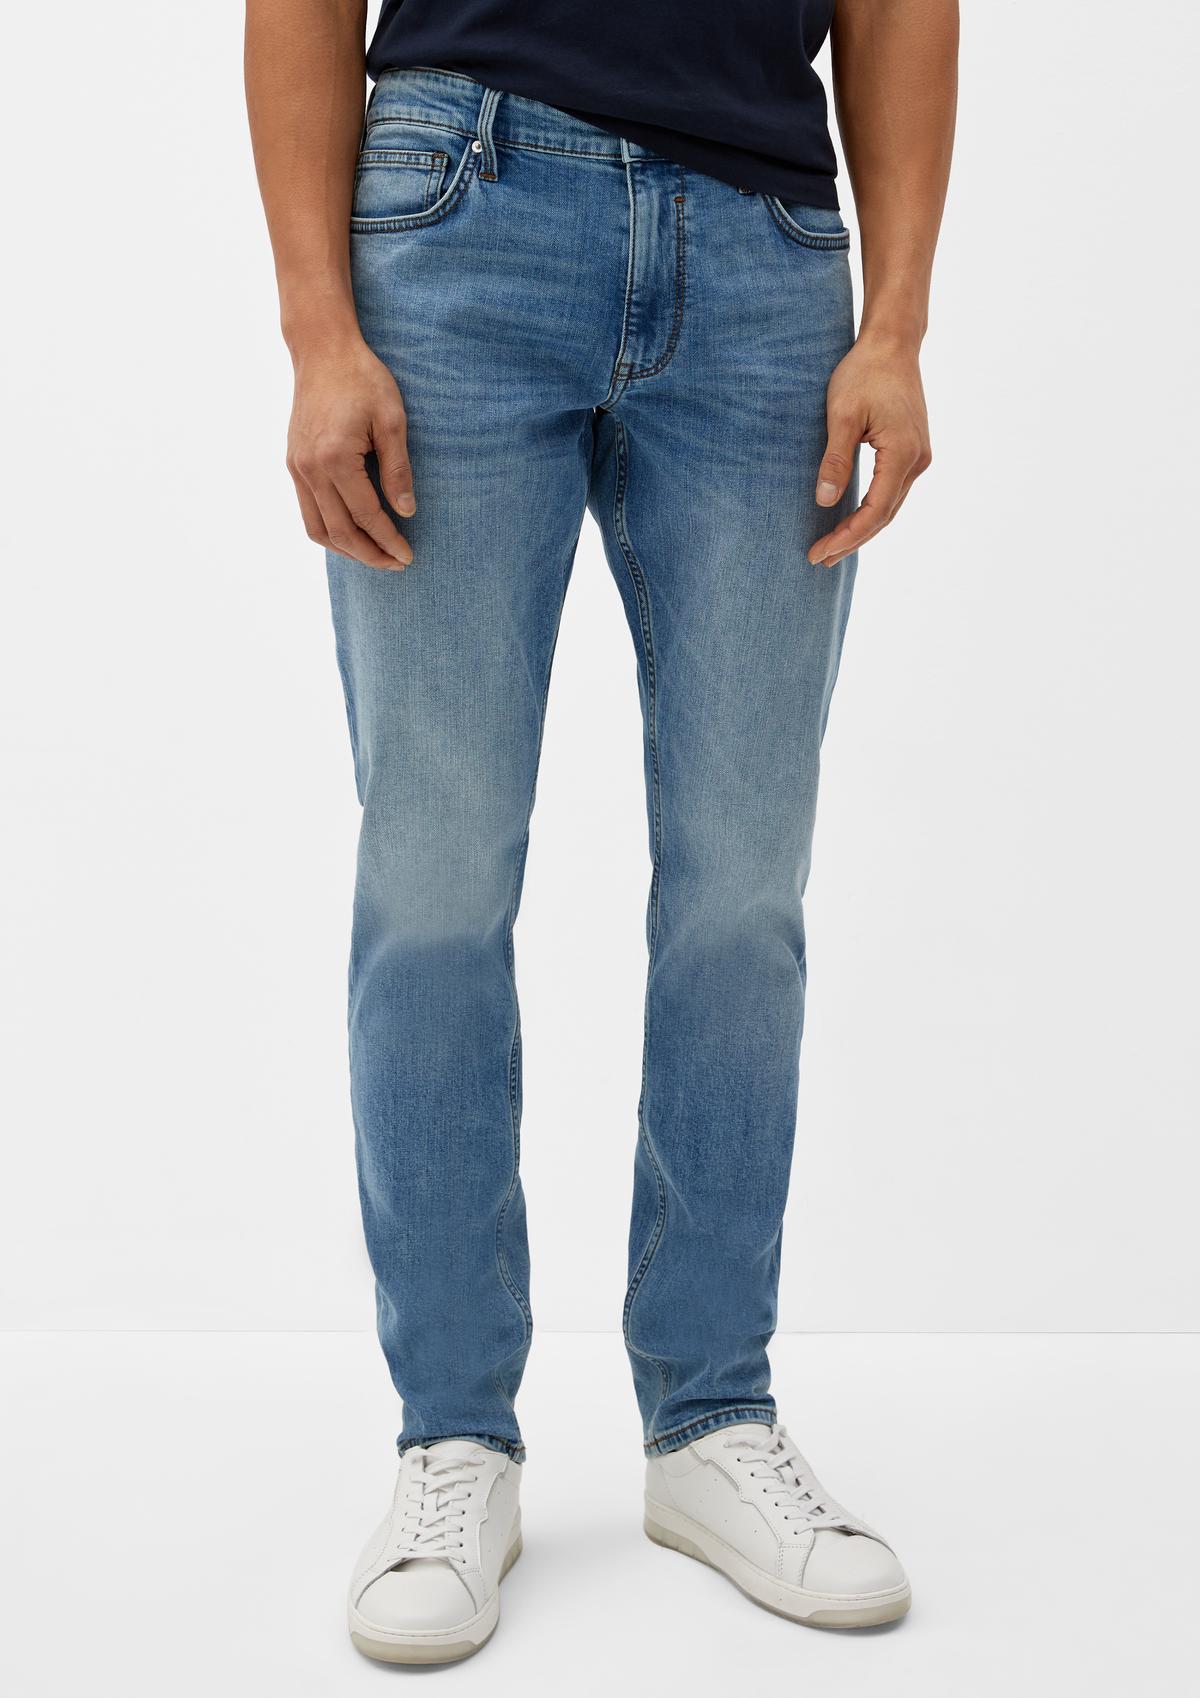 s.Oliver Jeans Keith / Slim Fit / Mid Rise / Straight Leg